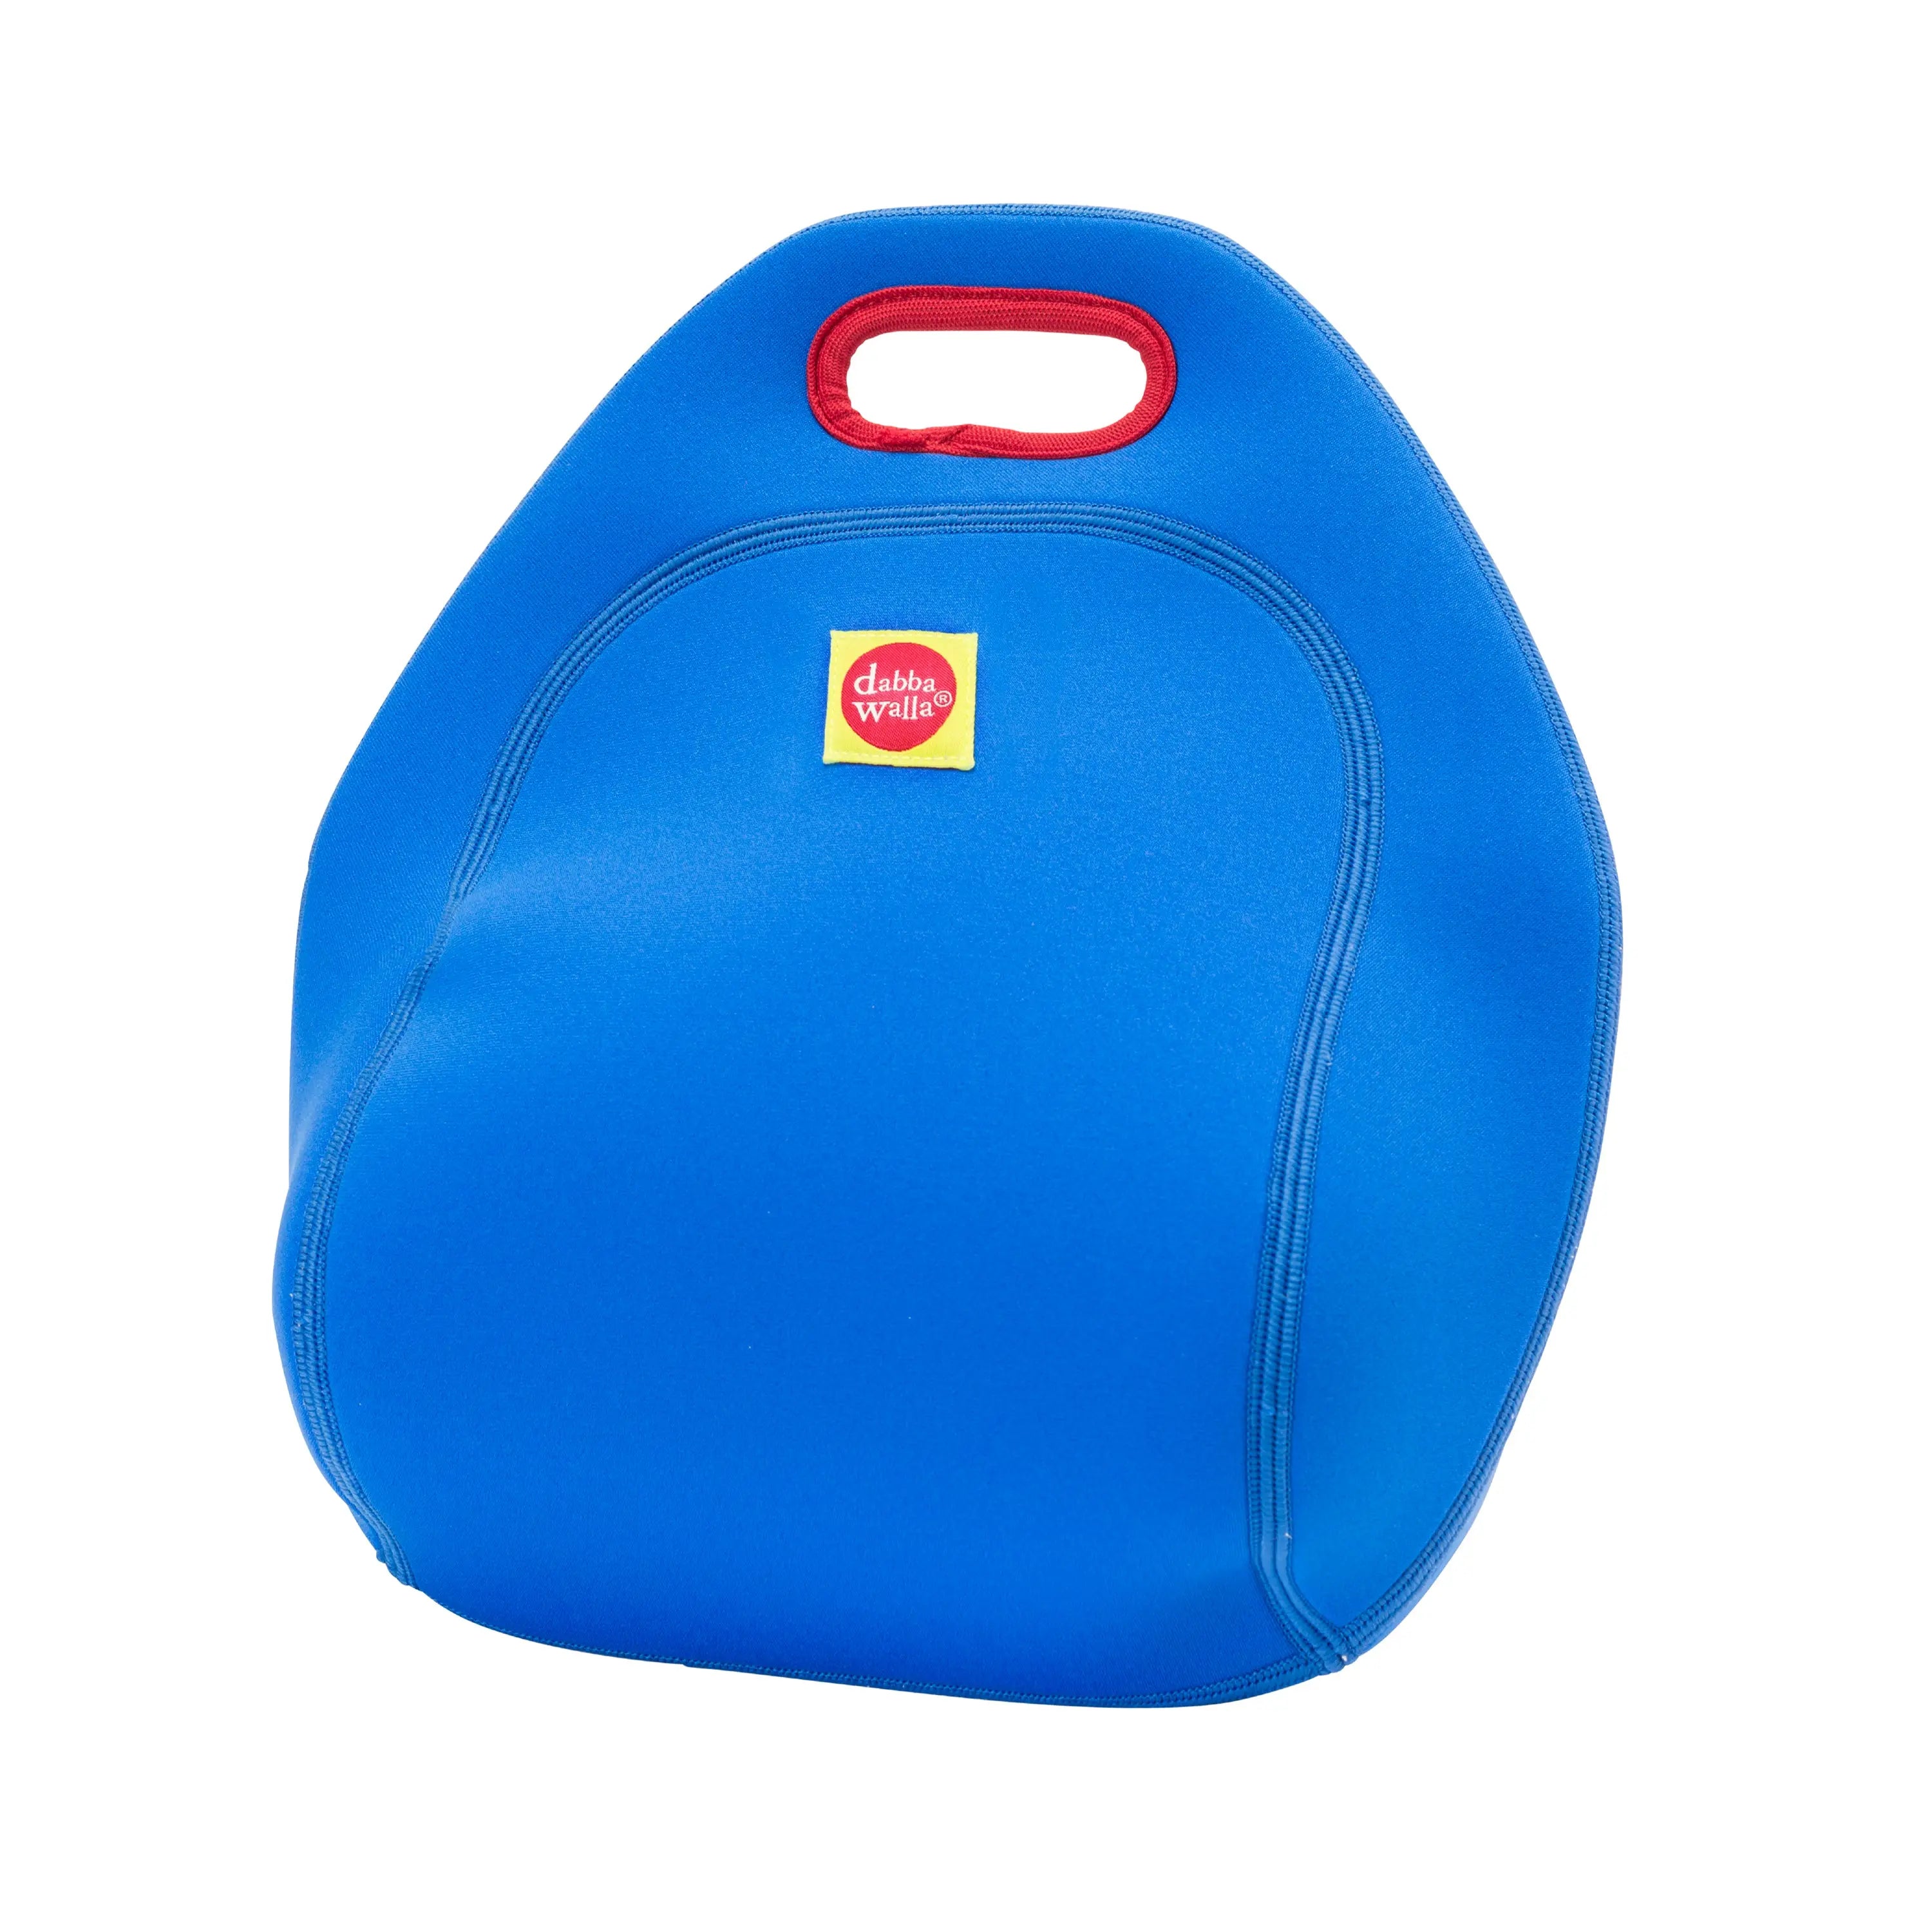 Airplane Lunch Bag - Blue, Insulated Neoprene Lunch Tote Lunch Bag Dabbawalla   